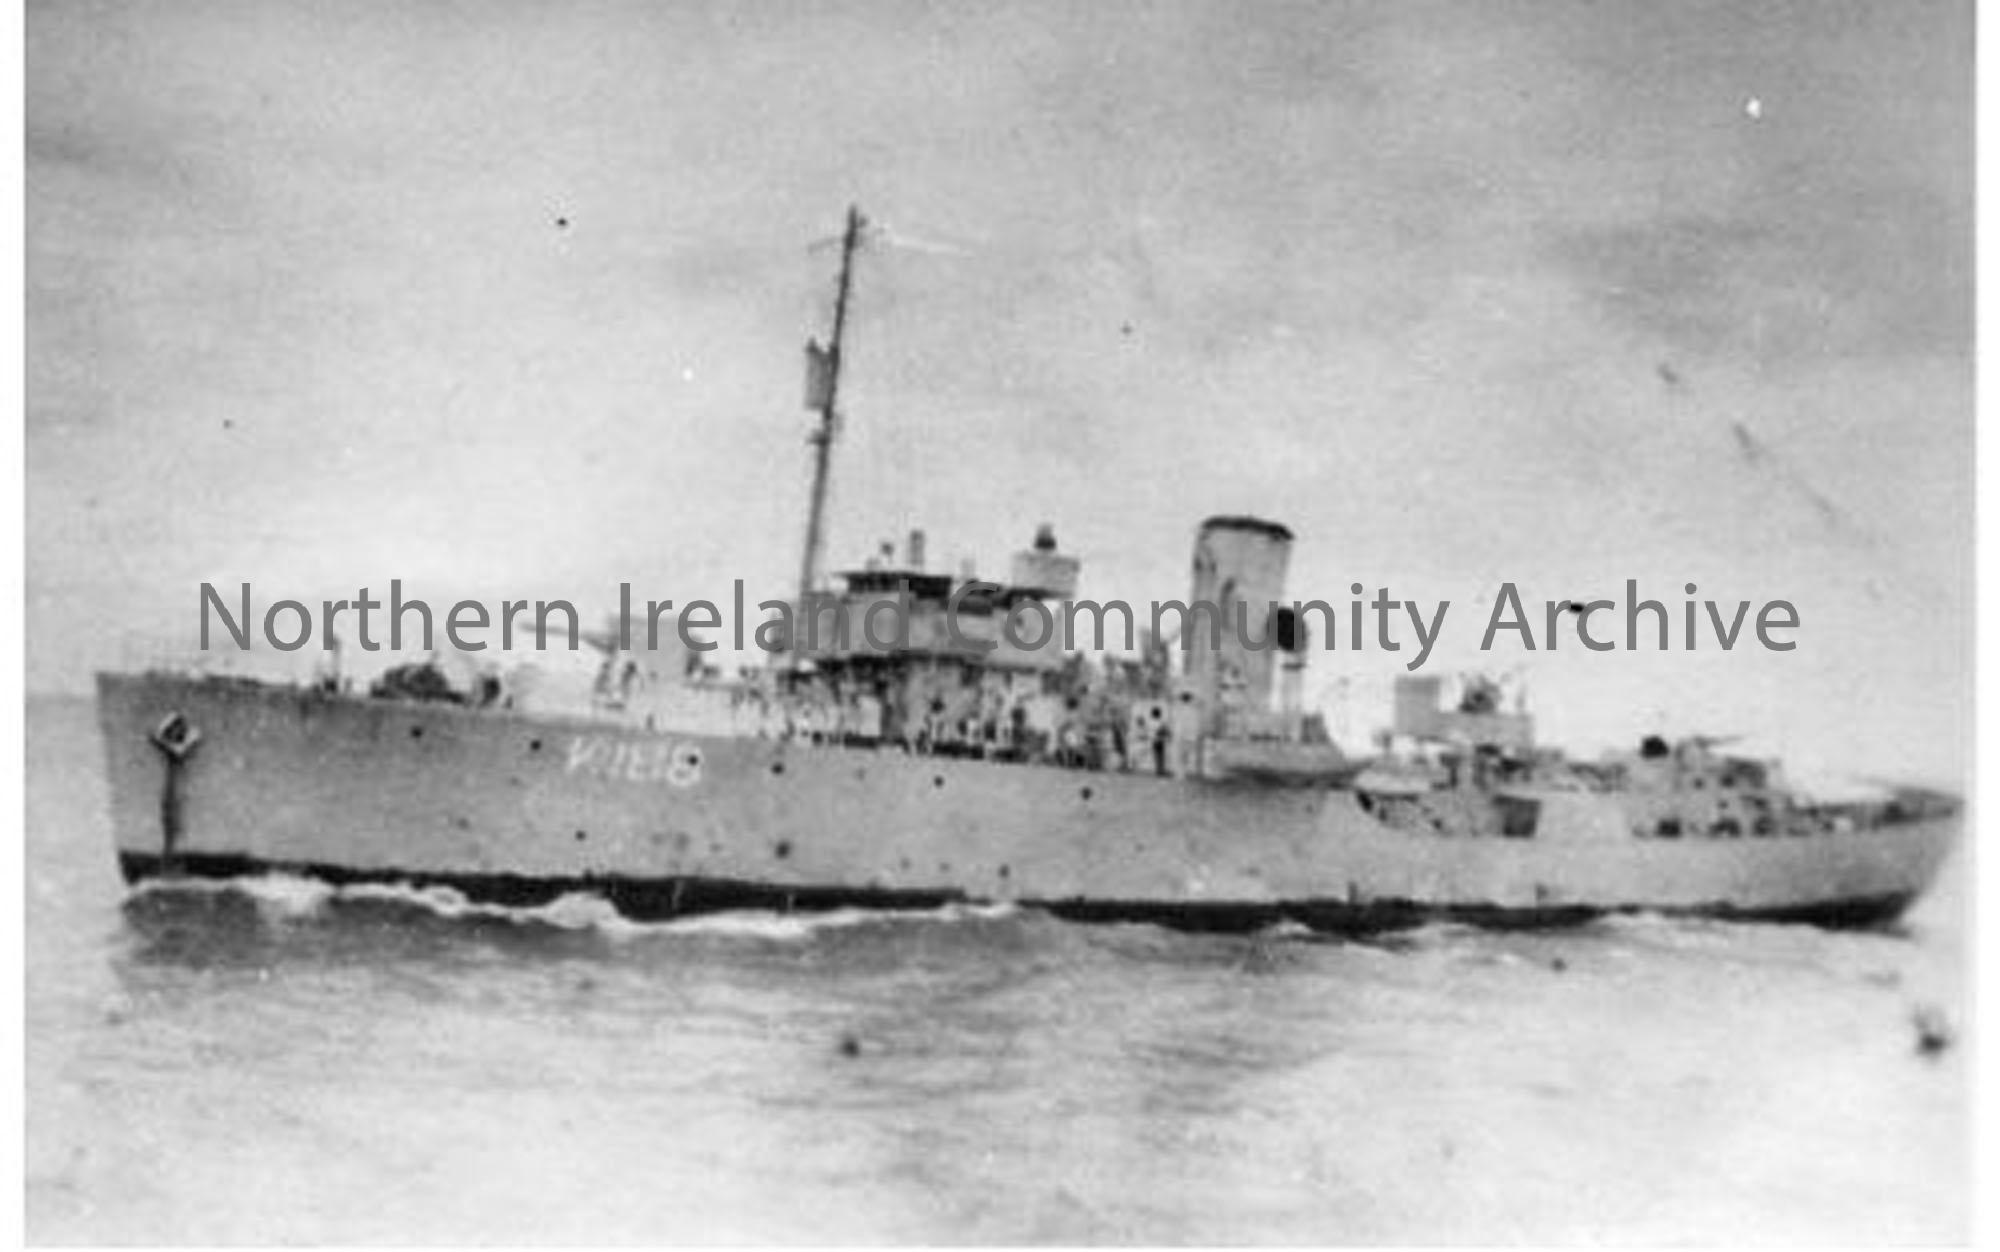 HMS Aster
K 188   
Launched 12 Feb, 1941  
Commissioned 9 Apr, 1941  
 (1798)